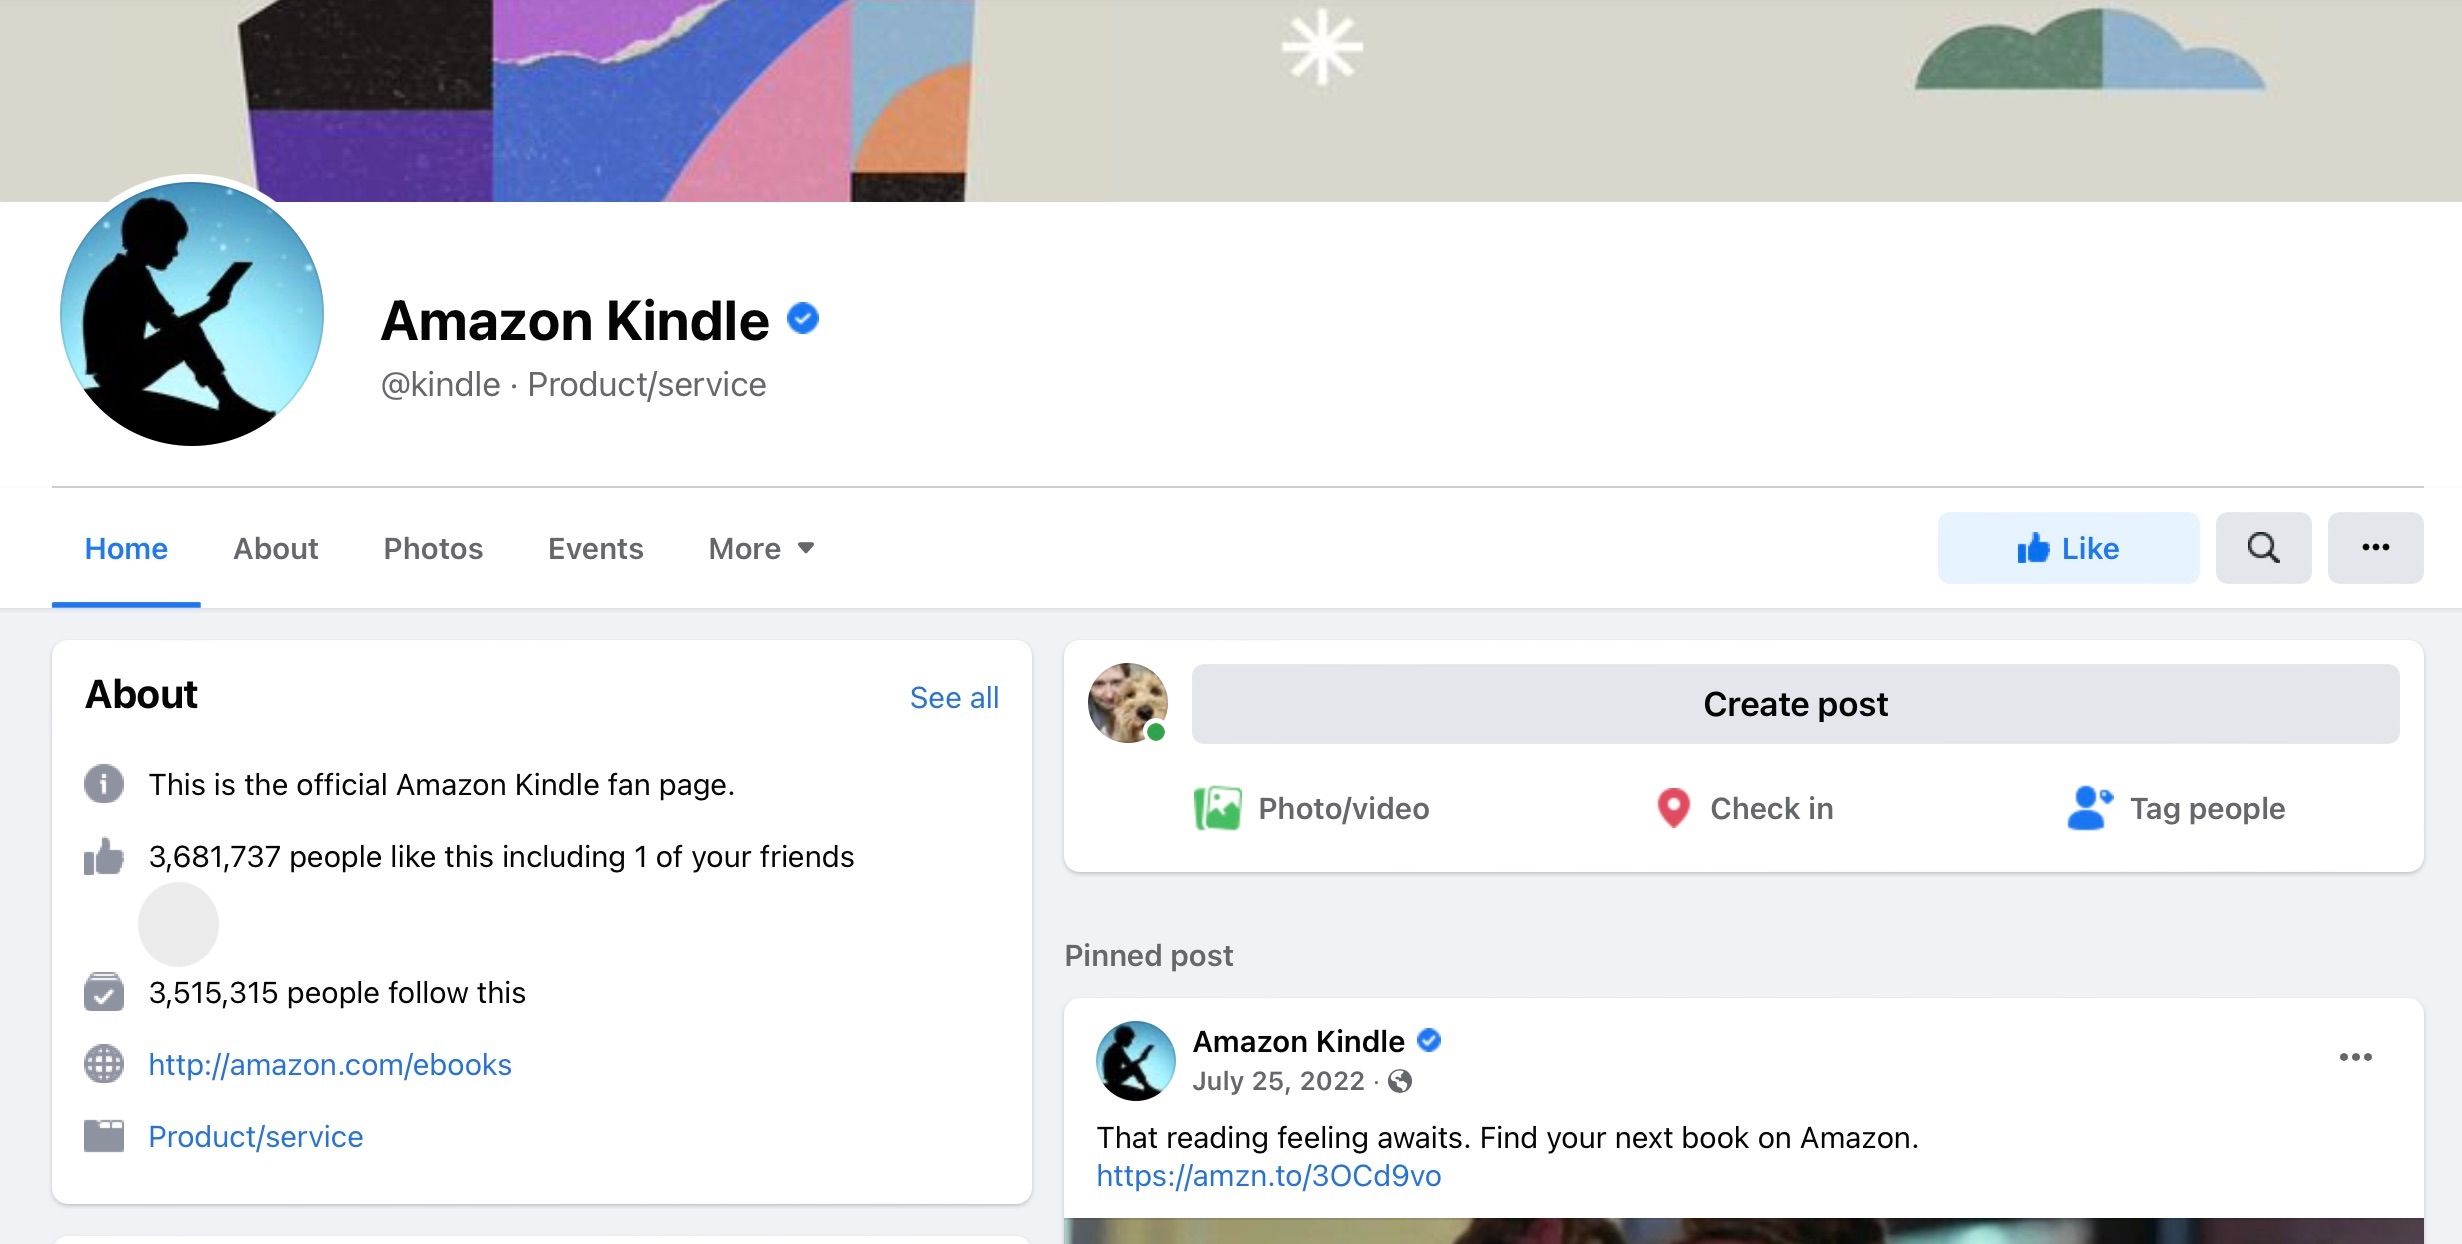 Screenshot of Amazon Kindle Facebook home page